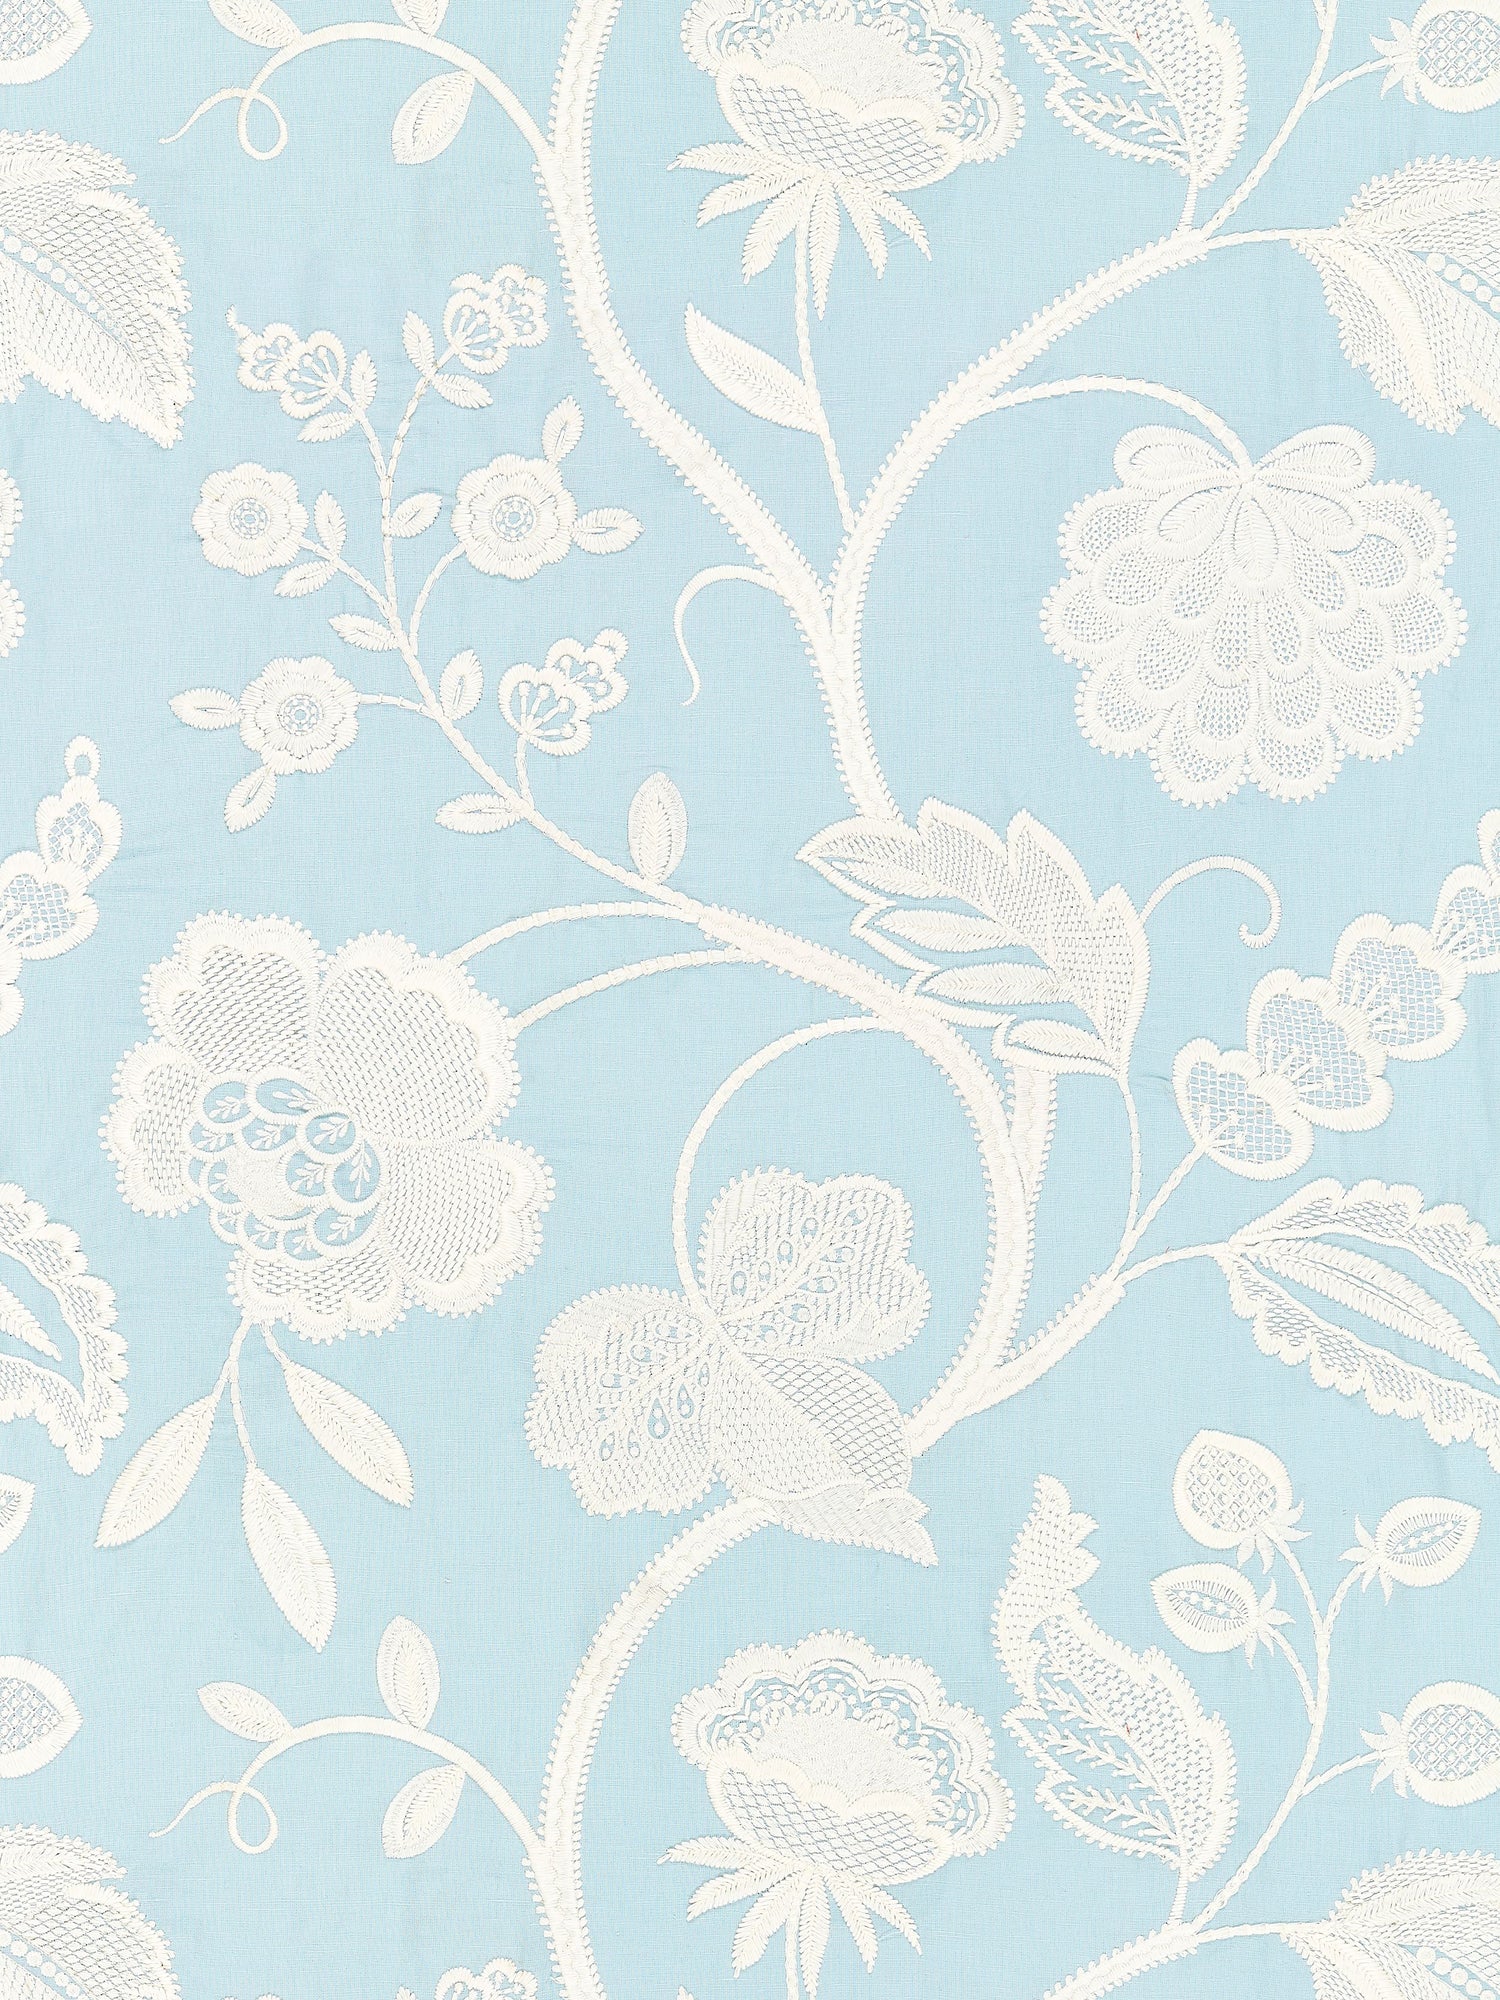 Kensington Embroidery fabric in sky color - pattern number SC 000327151 - by Scalamandre in the Scalamandre Fabrics Book 1 collection